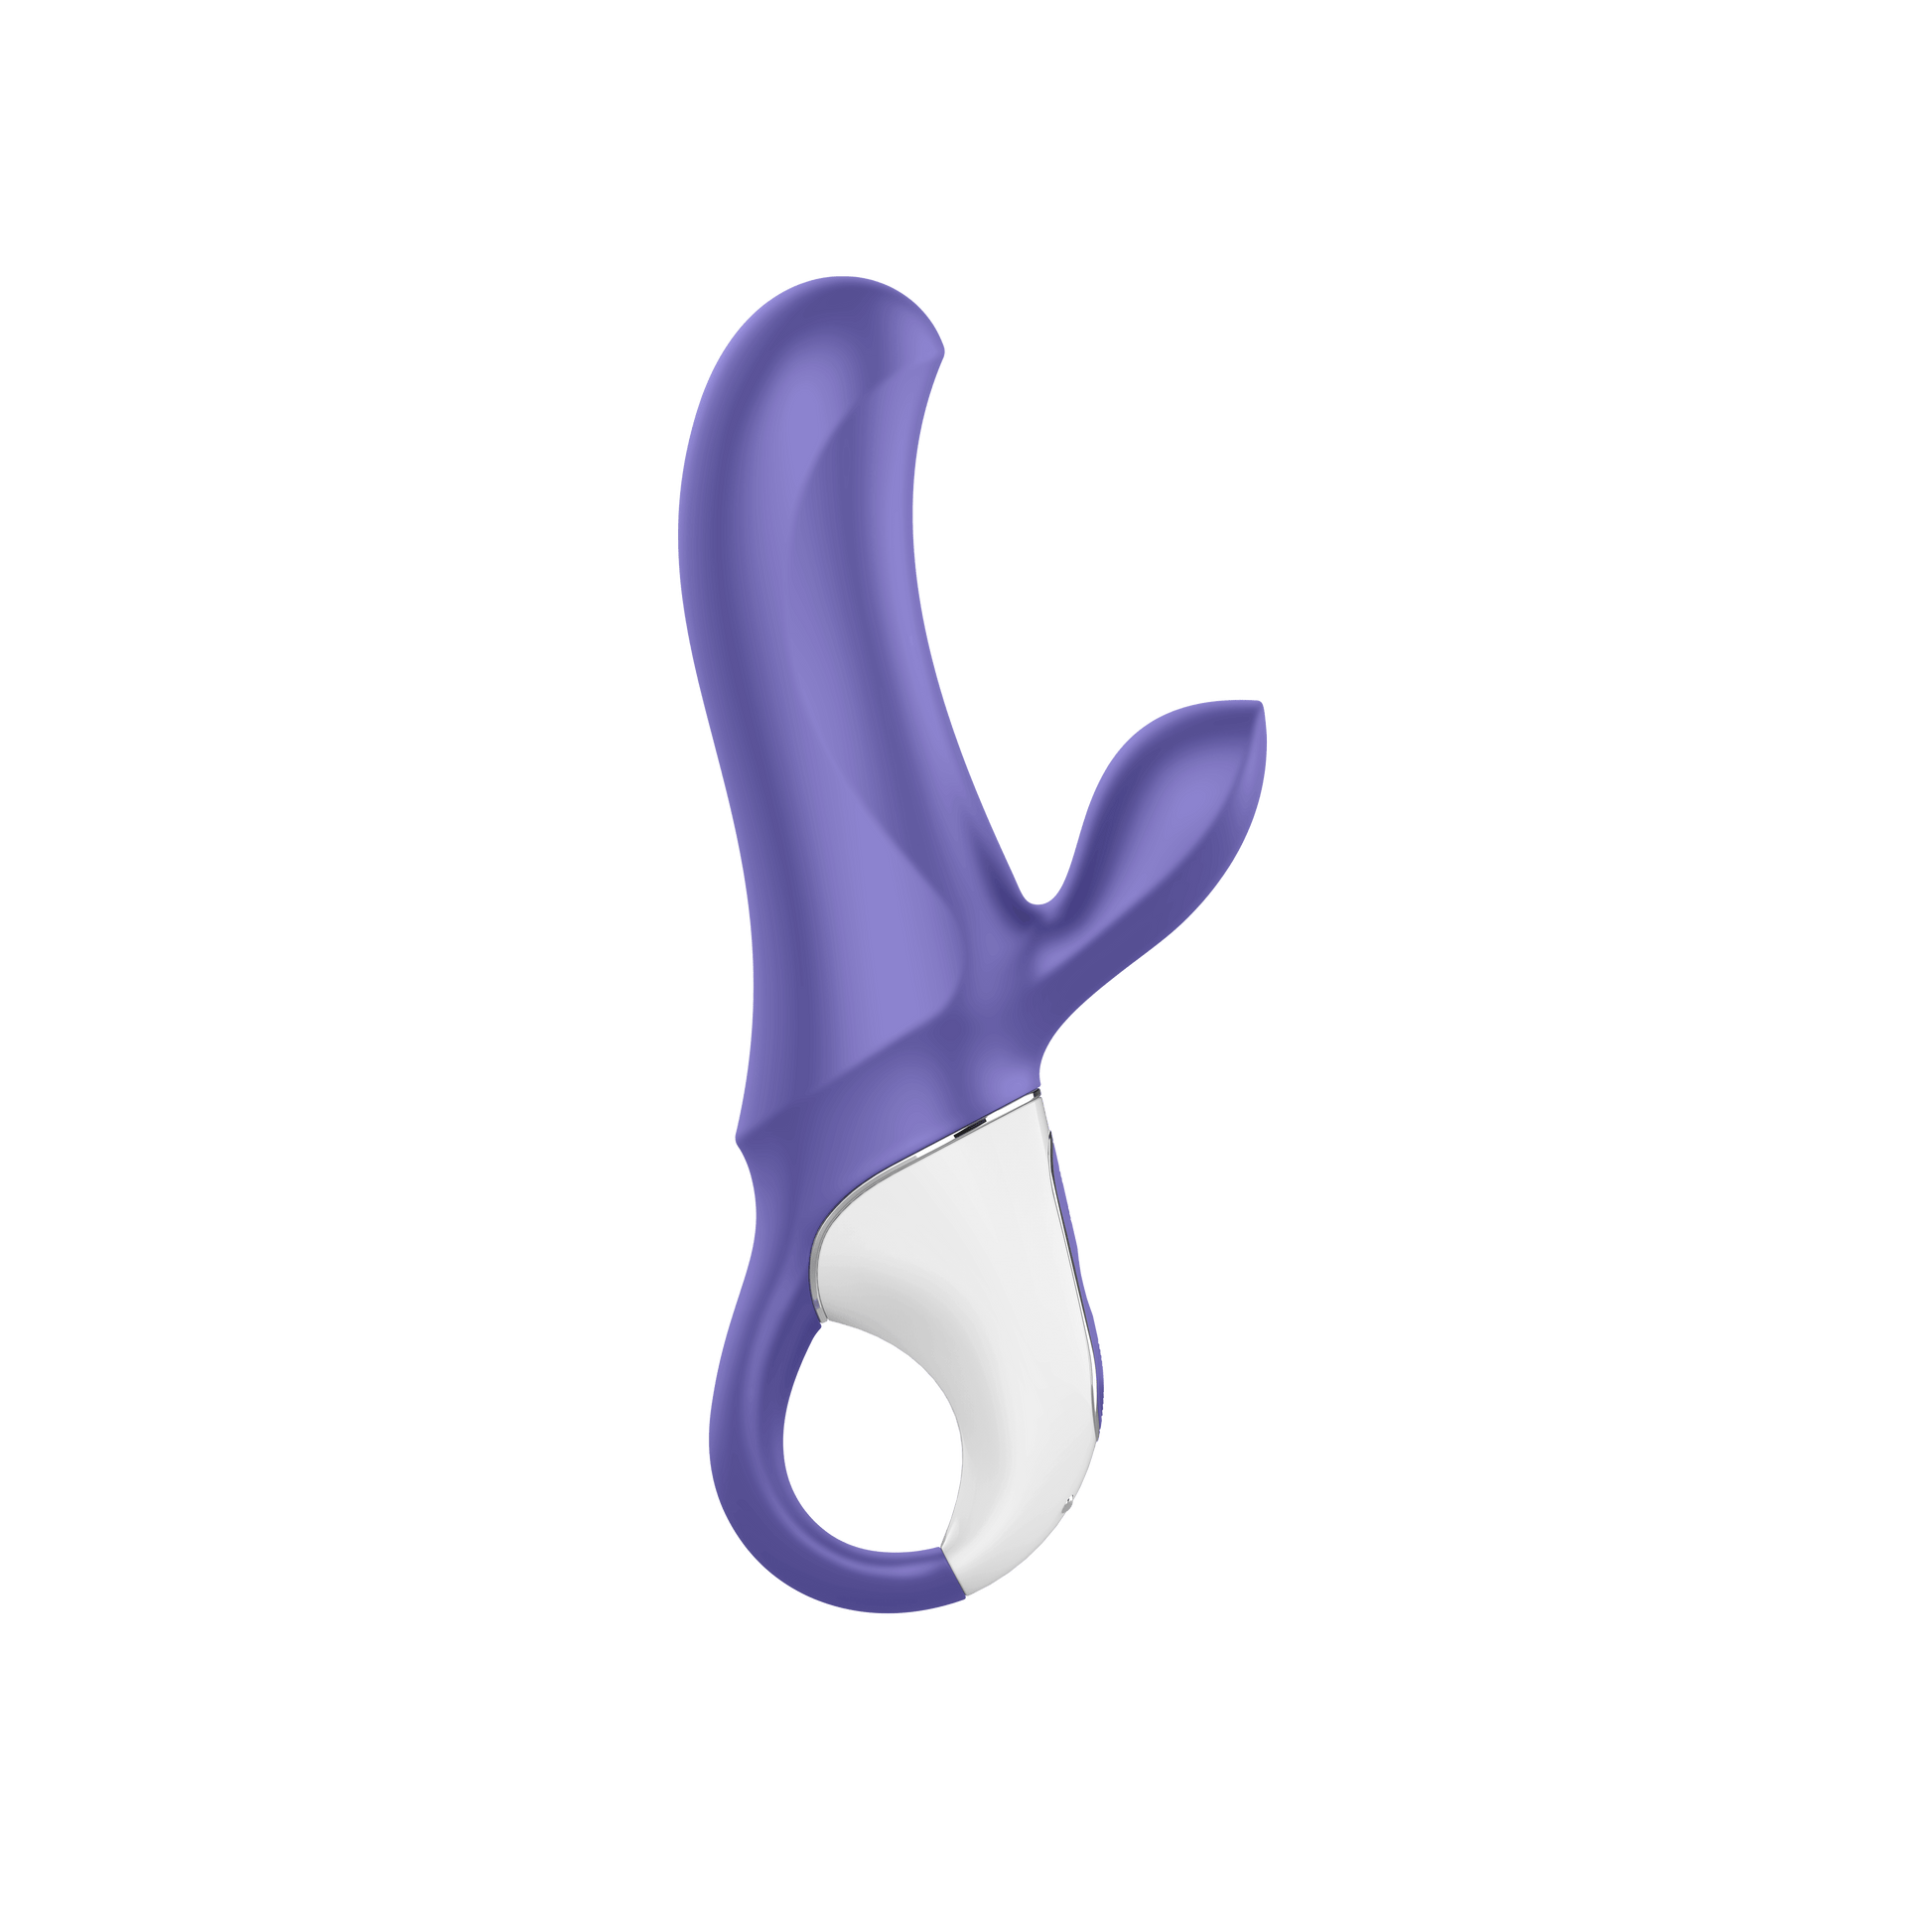 Satisfyer Vibes Magic Bunny - Thorn & Feather Sex Toy Canada